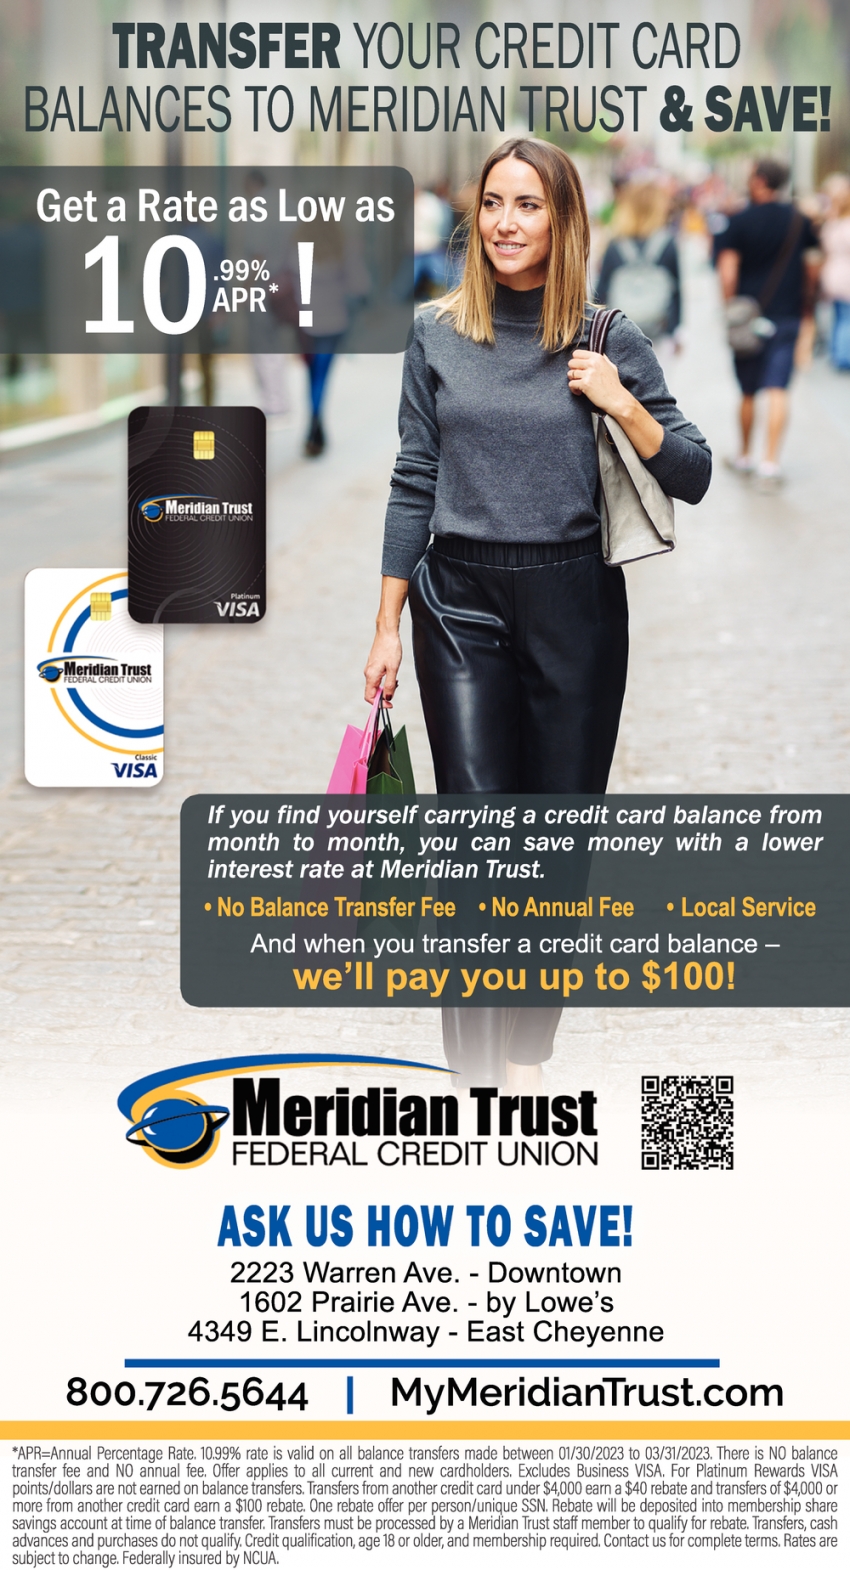 Transfer Your Credit Card Balances to Meridian Trust & Save!